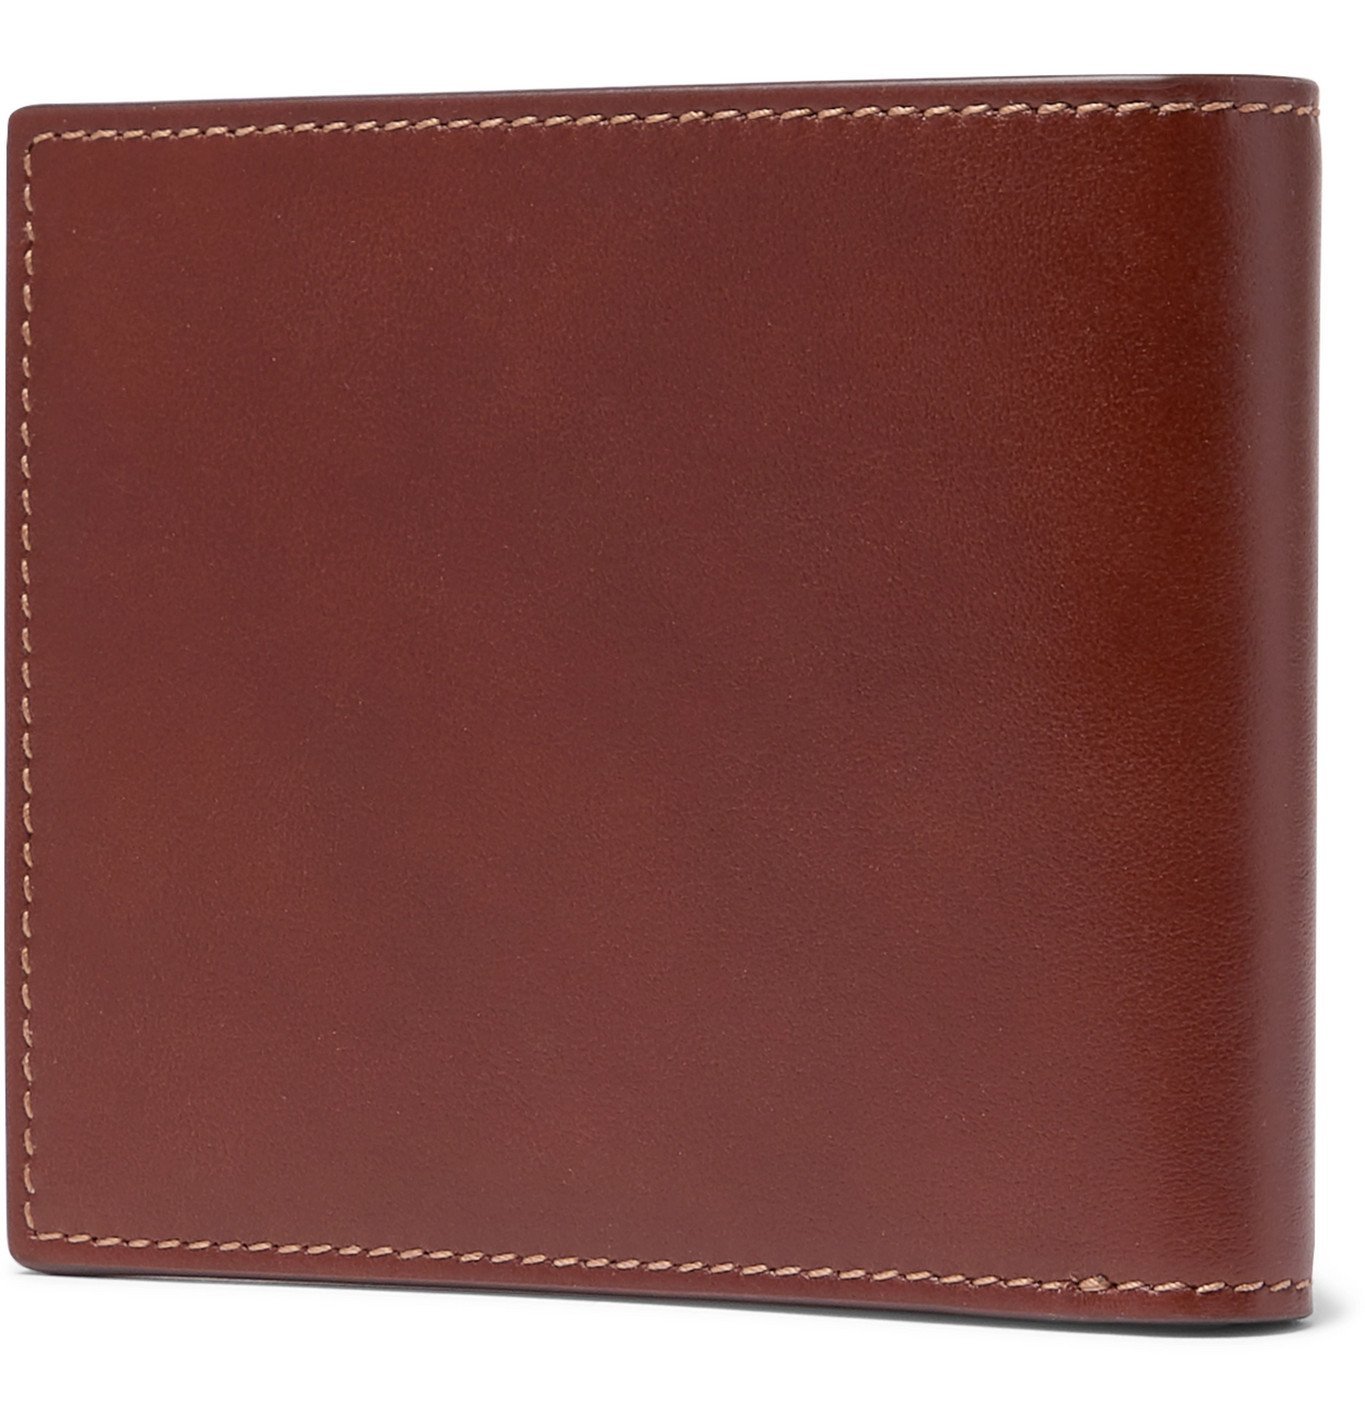 TOM FORD - Leather Billfold Wallet - Brown TOM FORD